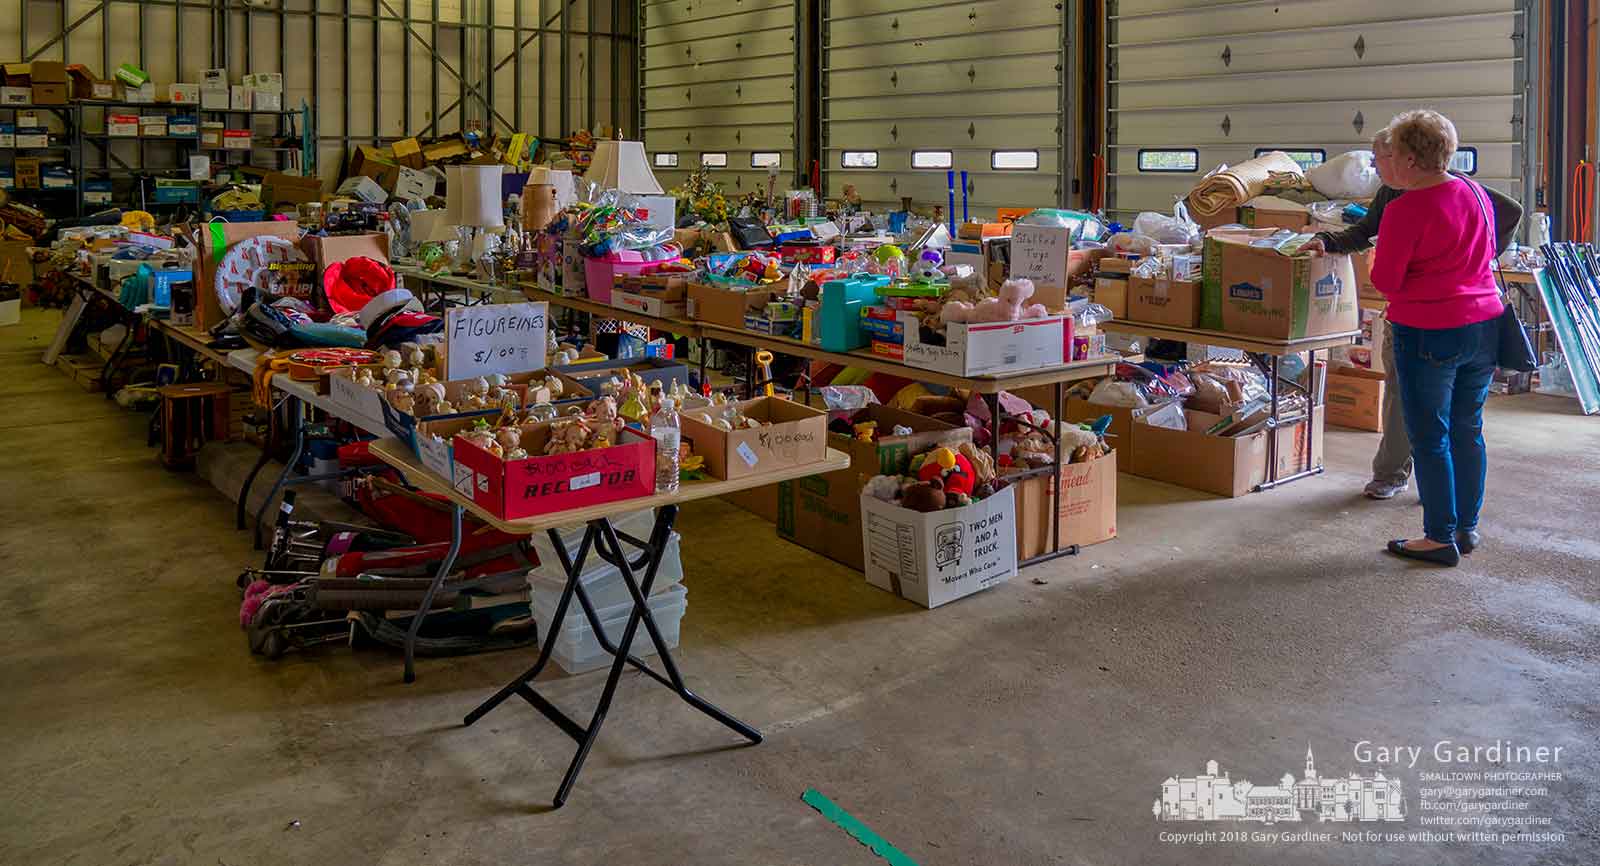 Final inspections are completed for the annual Senior Center Garage Sale in the garage behind the center beginning Thursday morning. My Final Photo for April 25, 2018.